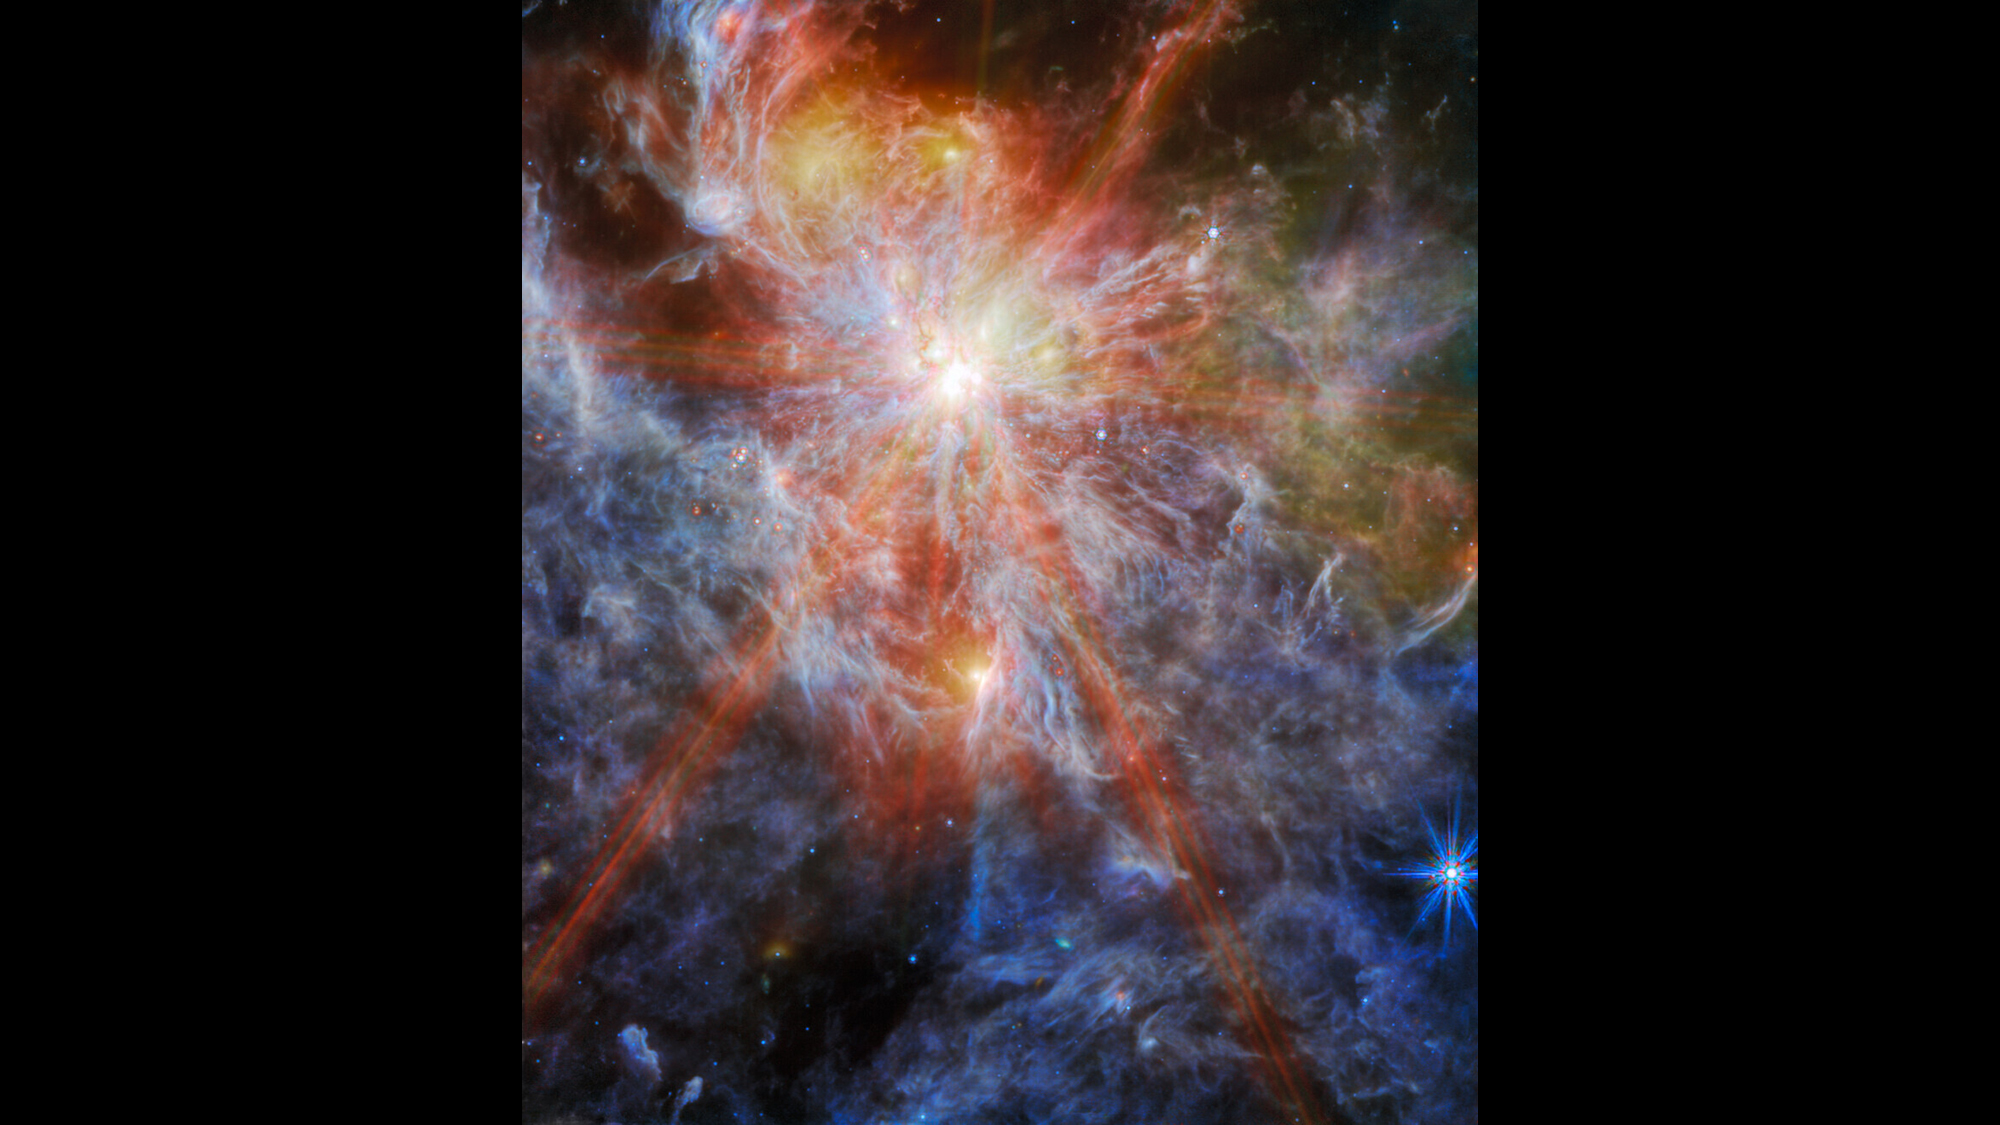 Check out JWST’s new image of a star factory